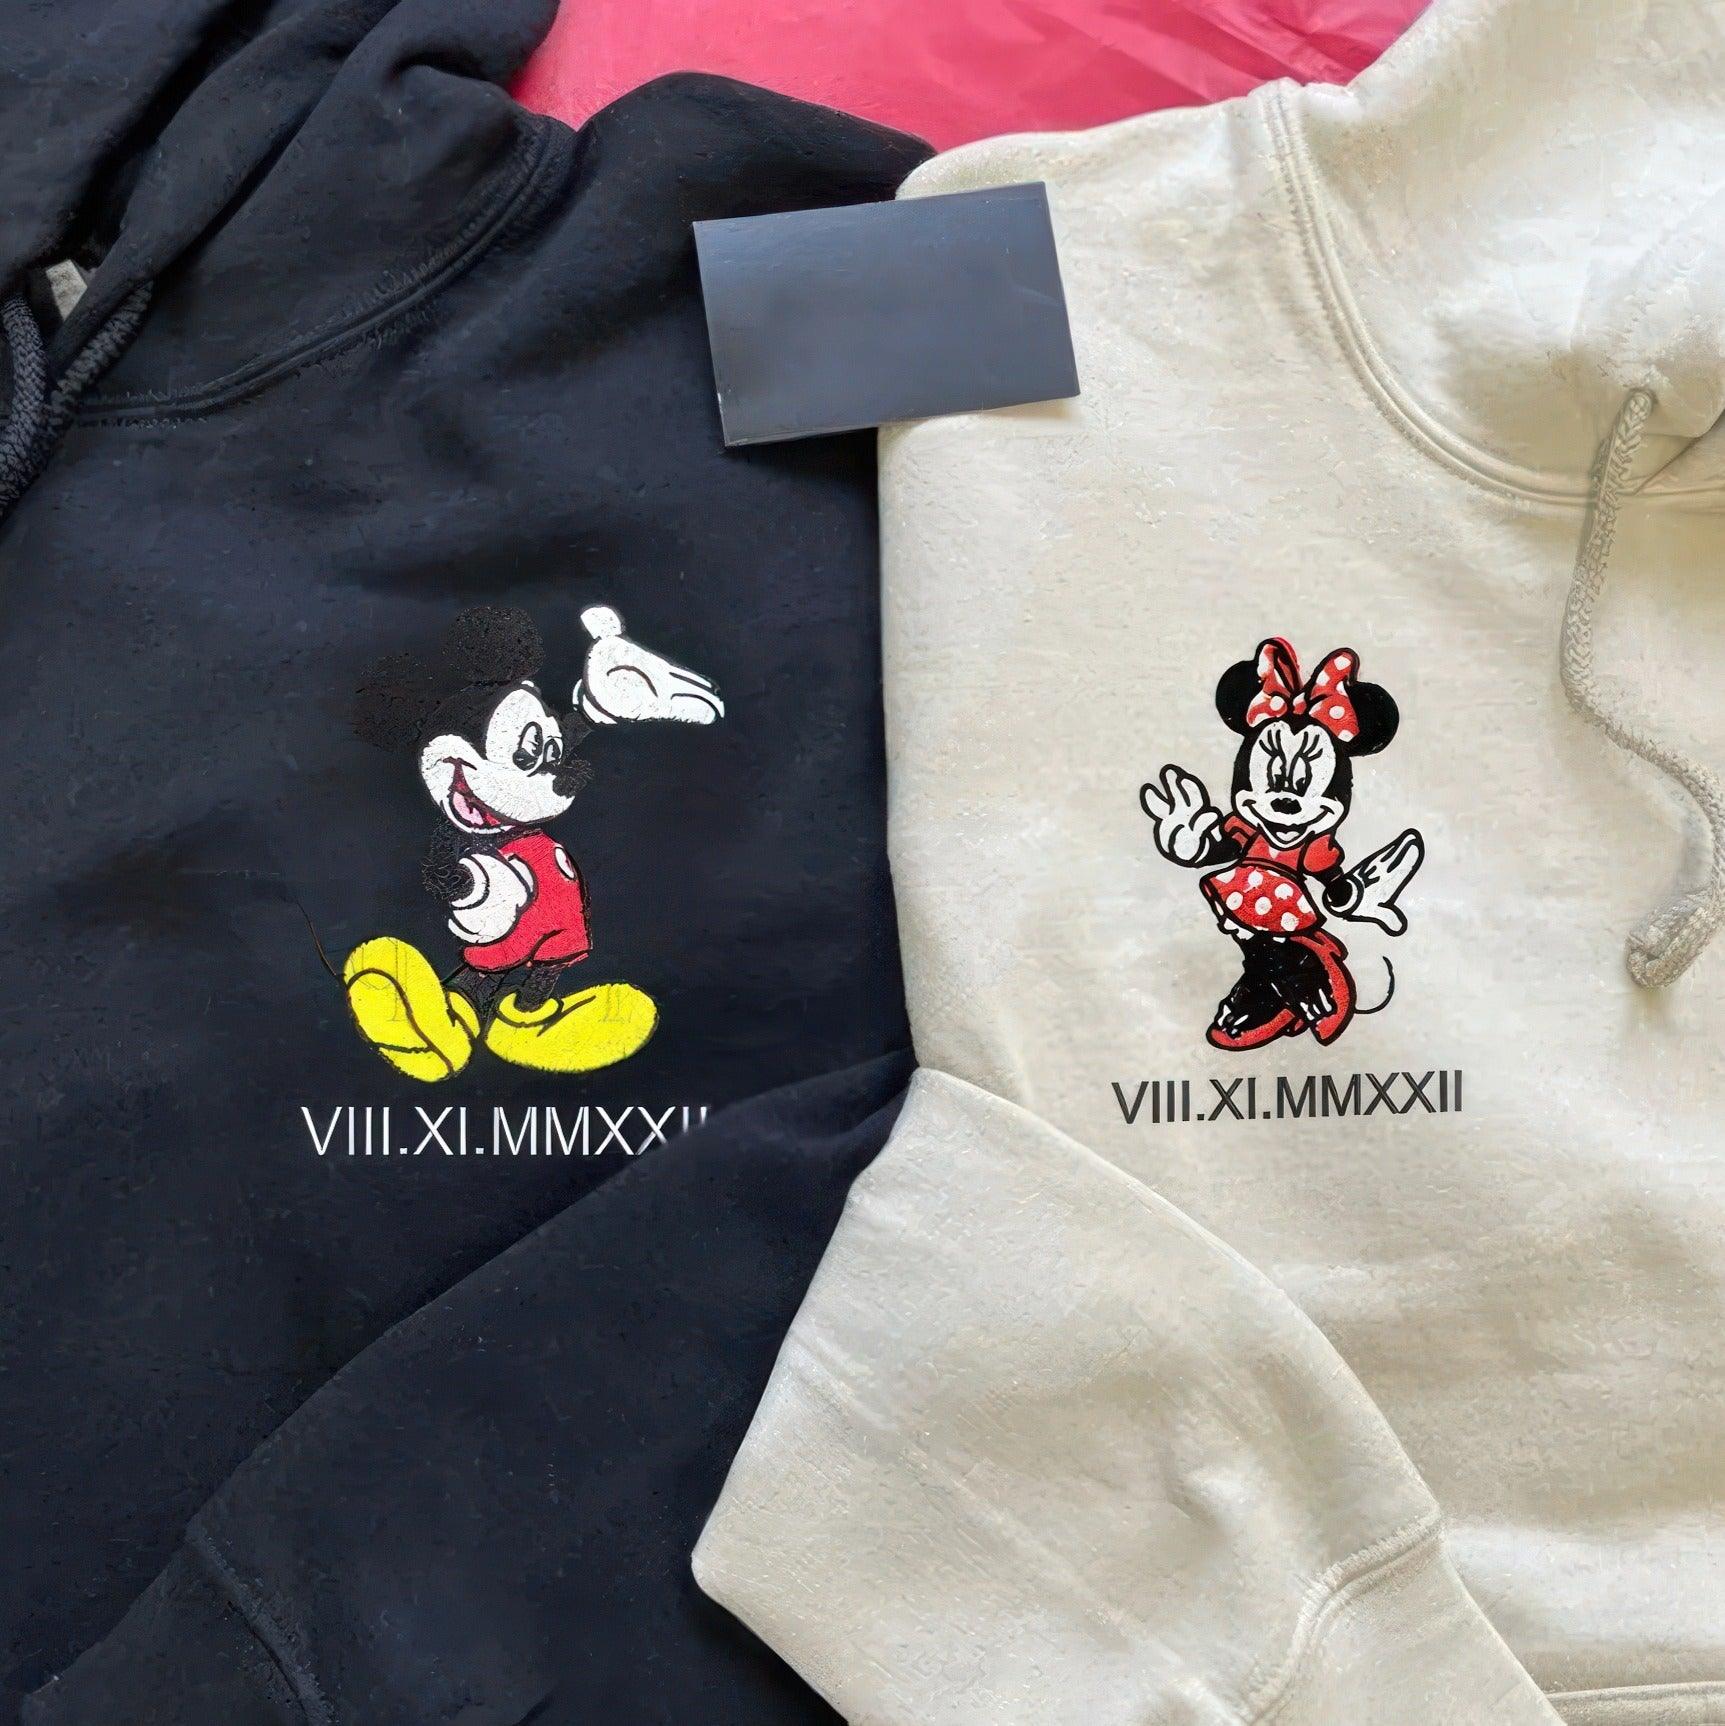 Custom Embroidered Hoodies For Couples, Matching Couples Hoodies, Cute Mouse Couples Embroidery Sweatshirt